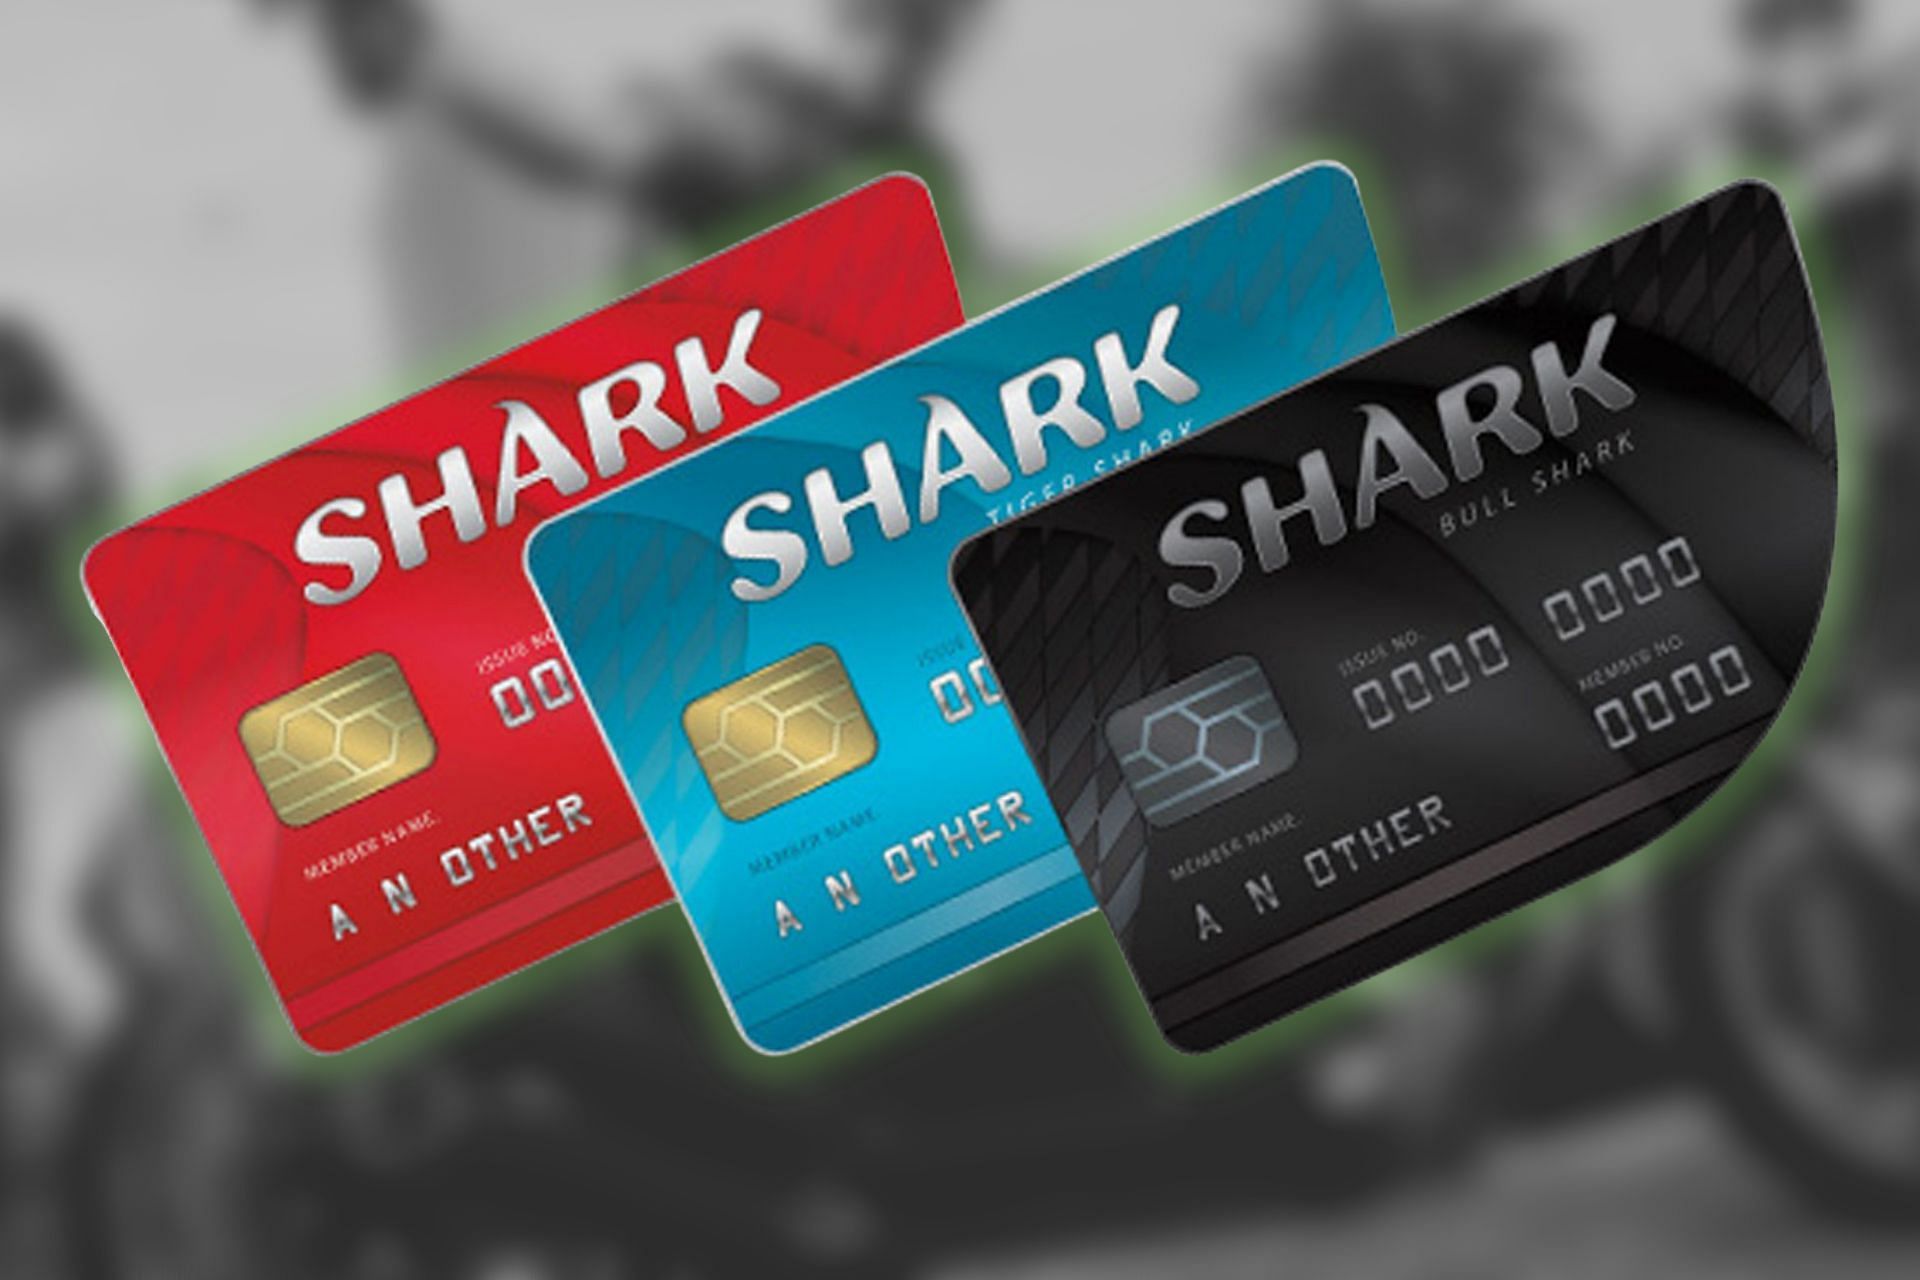 Shark Cards are argubly the most controversial feature of Grand Theft Auto Online (Images via Sportskeeda)